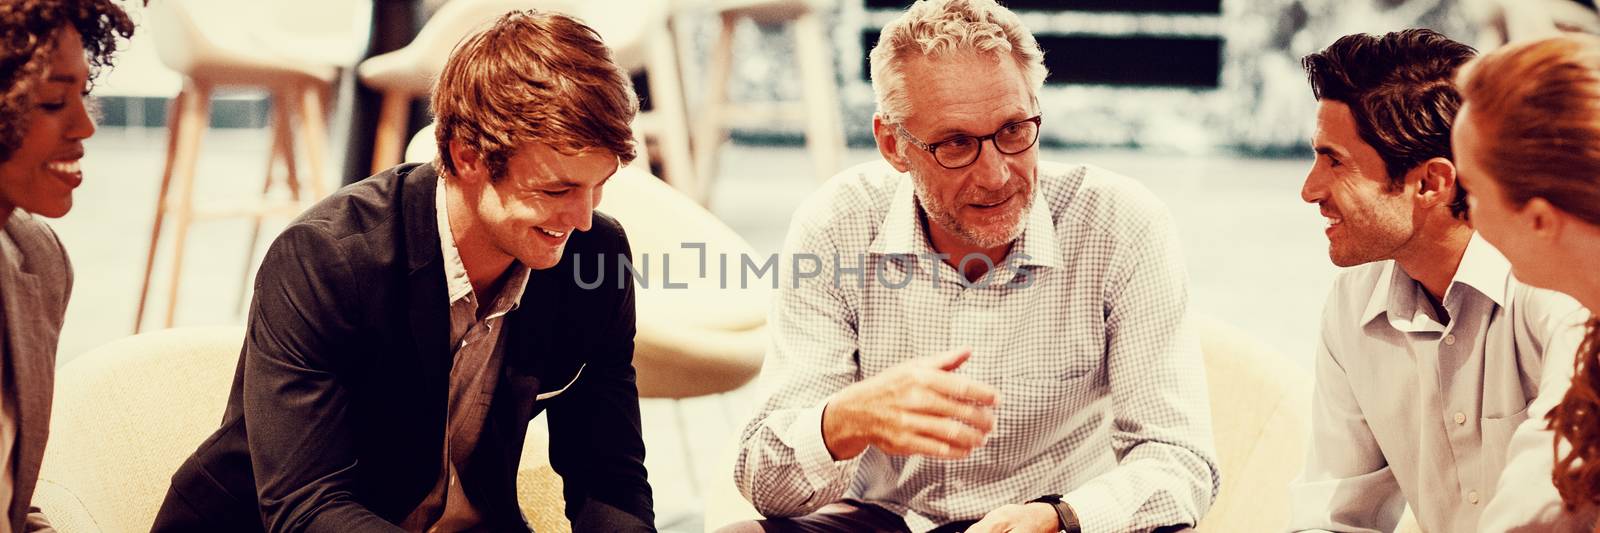 Business people having a discussion in cafeteria by Wavebreakmedia